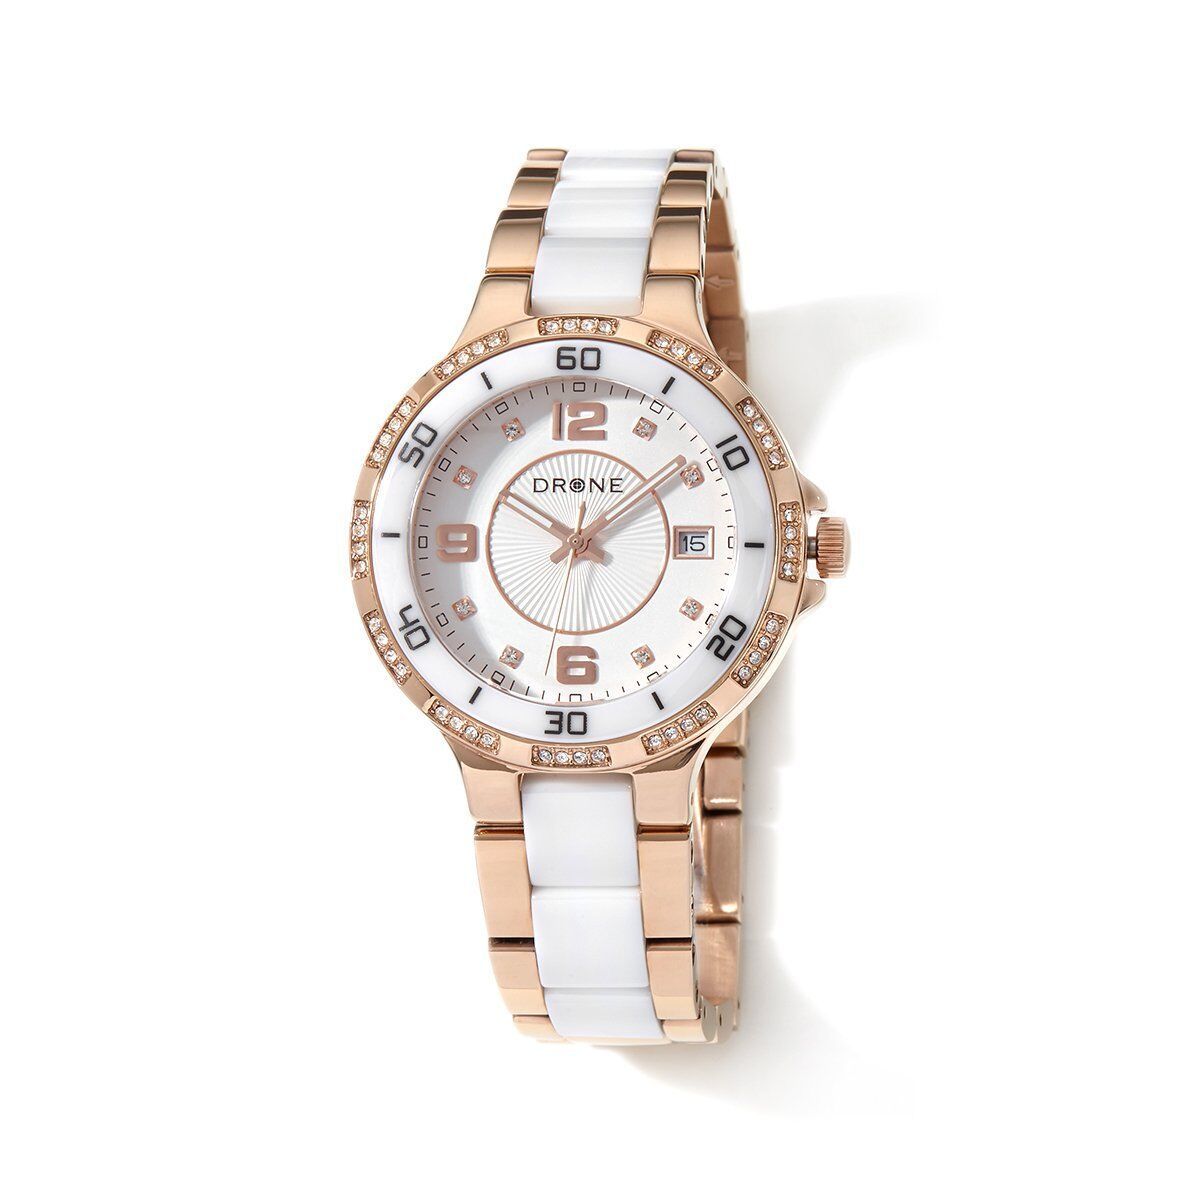 Drone Precision Timepieces White Ceramic Stainless Steel Rosetone Watch Hsn $200 | Wristwatches